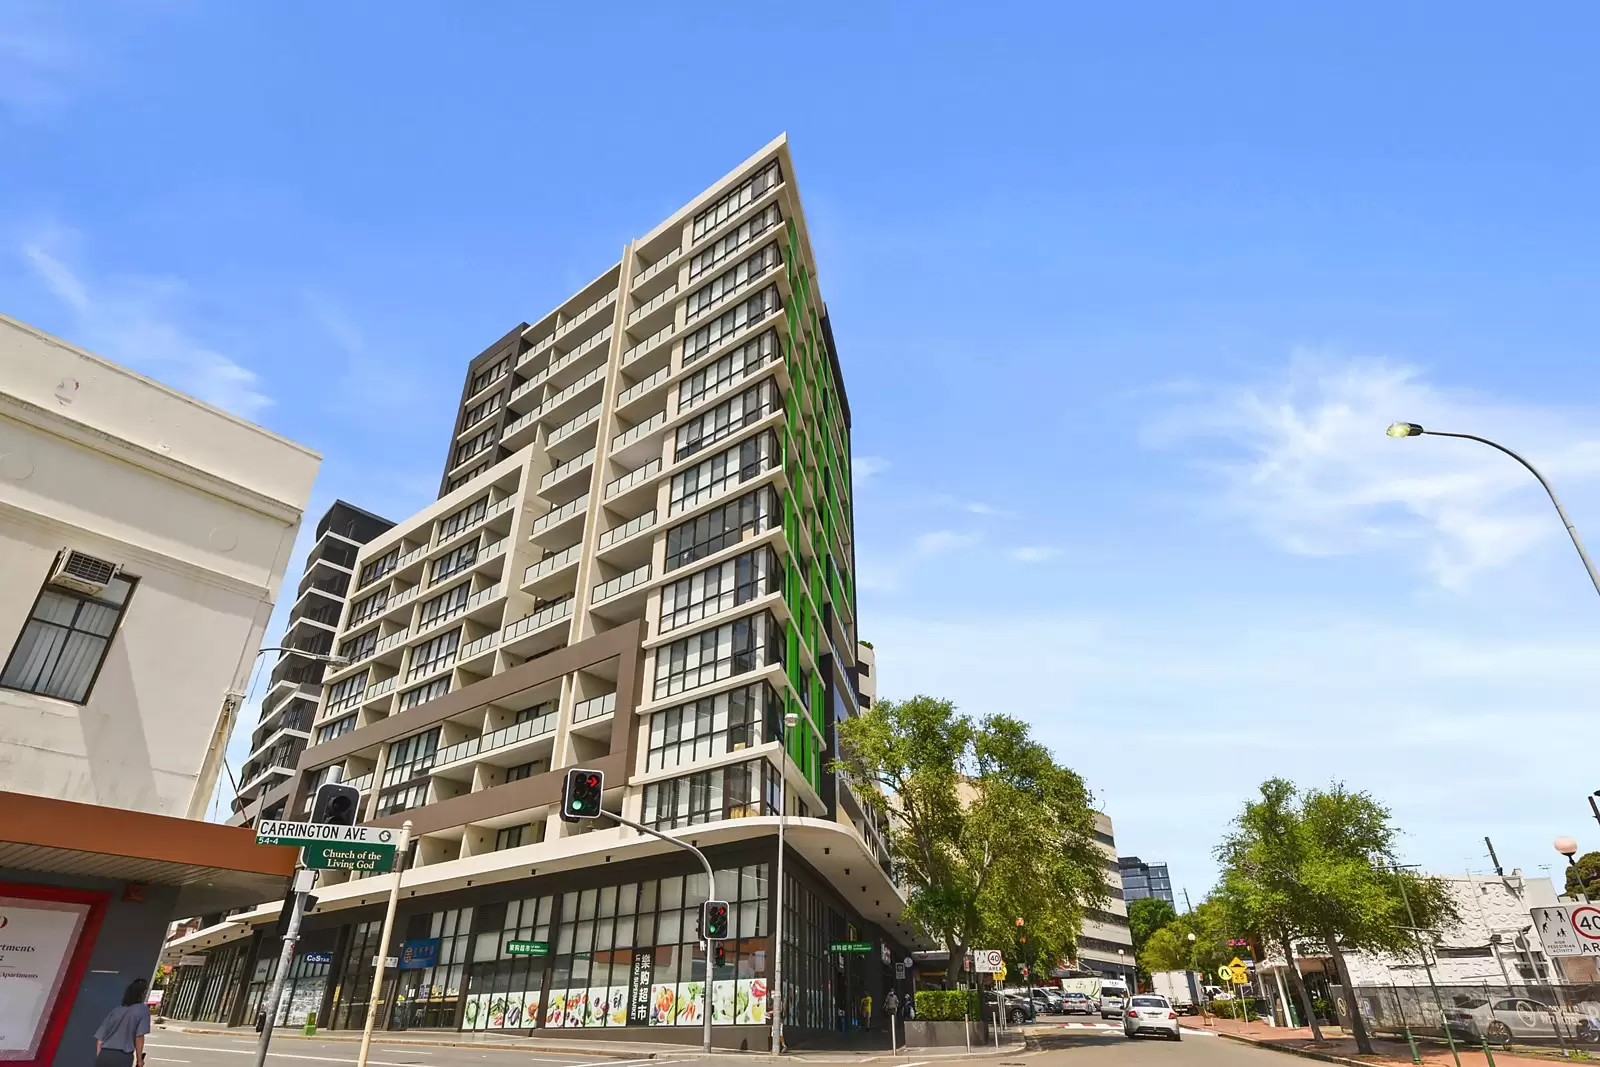 Photo #7: 1001/380 Forest Road, Hurstville - Sold by Sydney Sotheby's International Realty